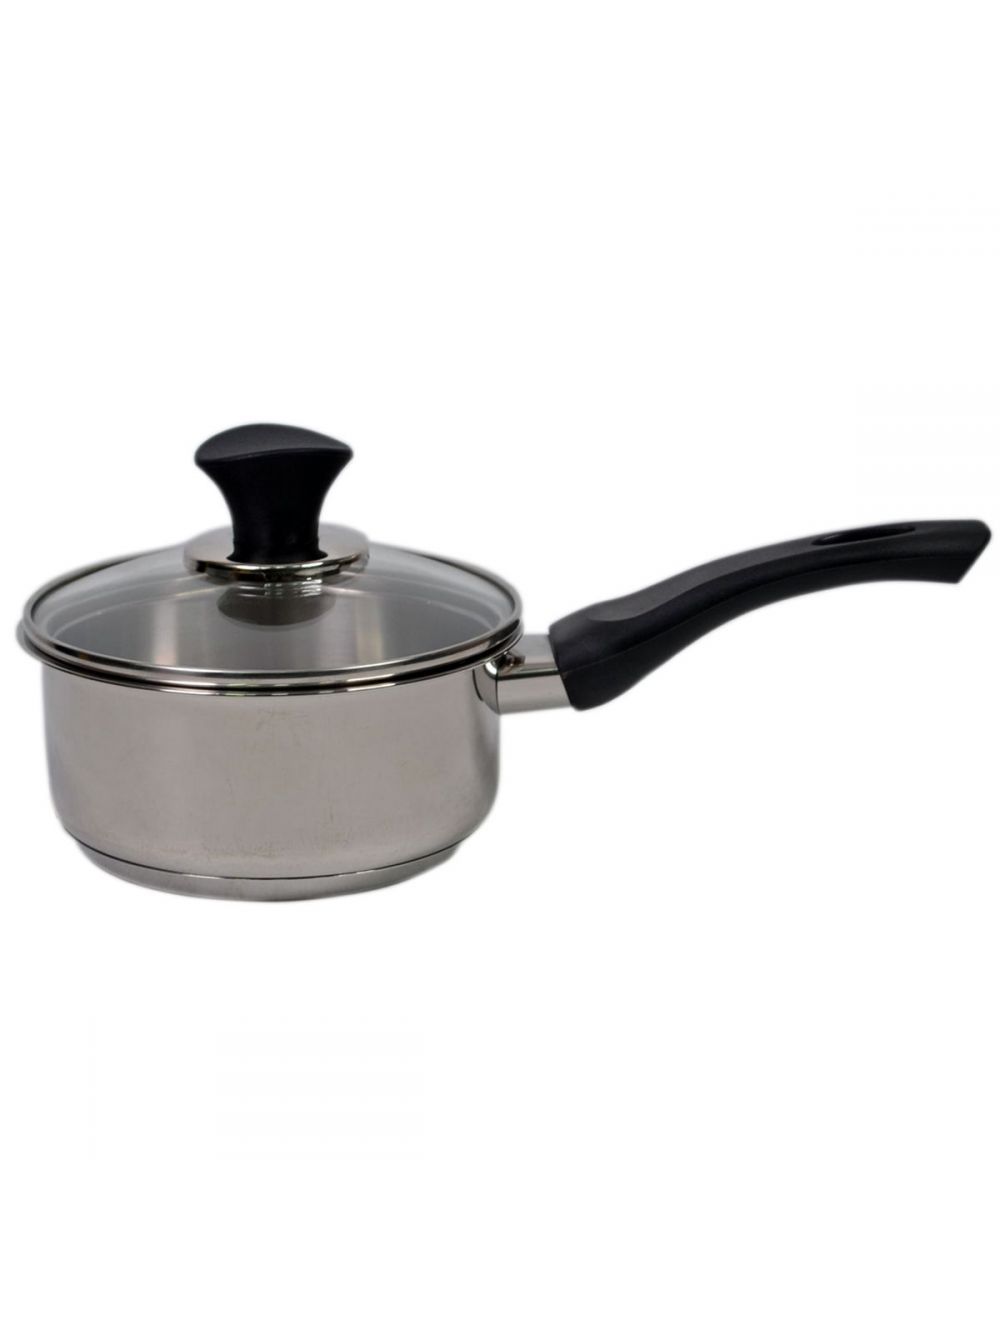 Silverstar Stainless Steel Sauce Pan with Glass Lid 14 cm-K10034